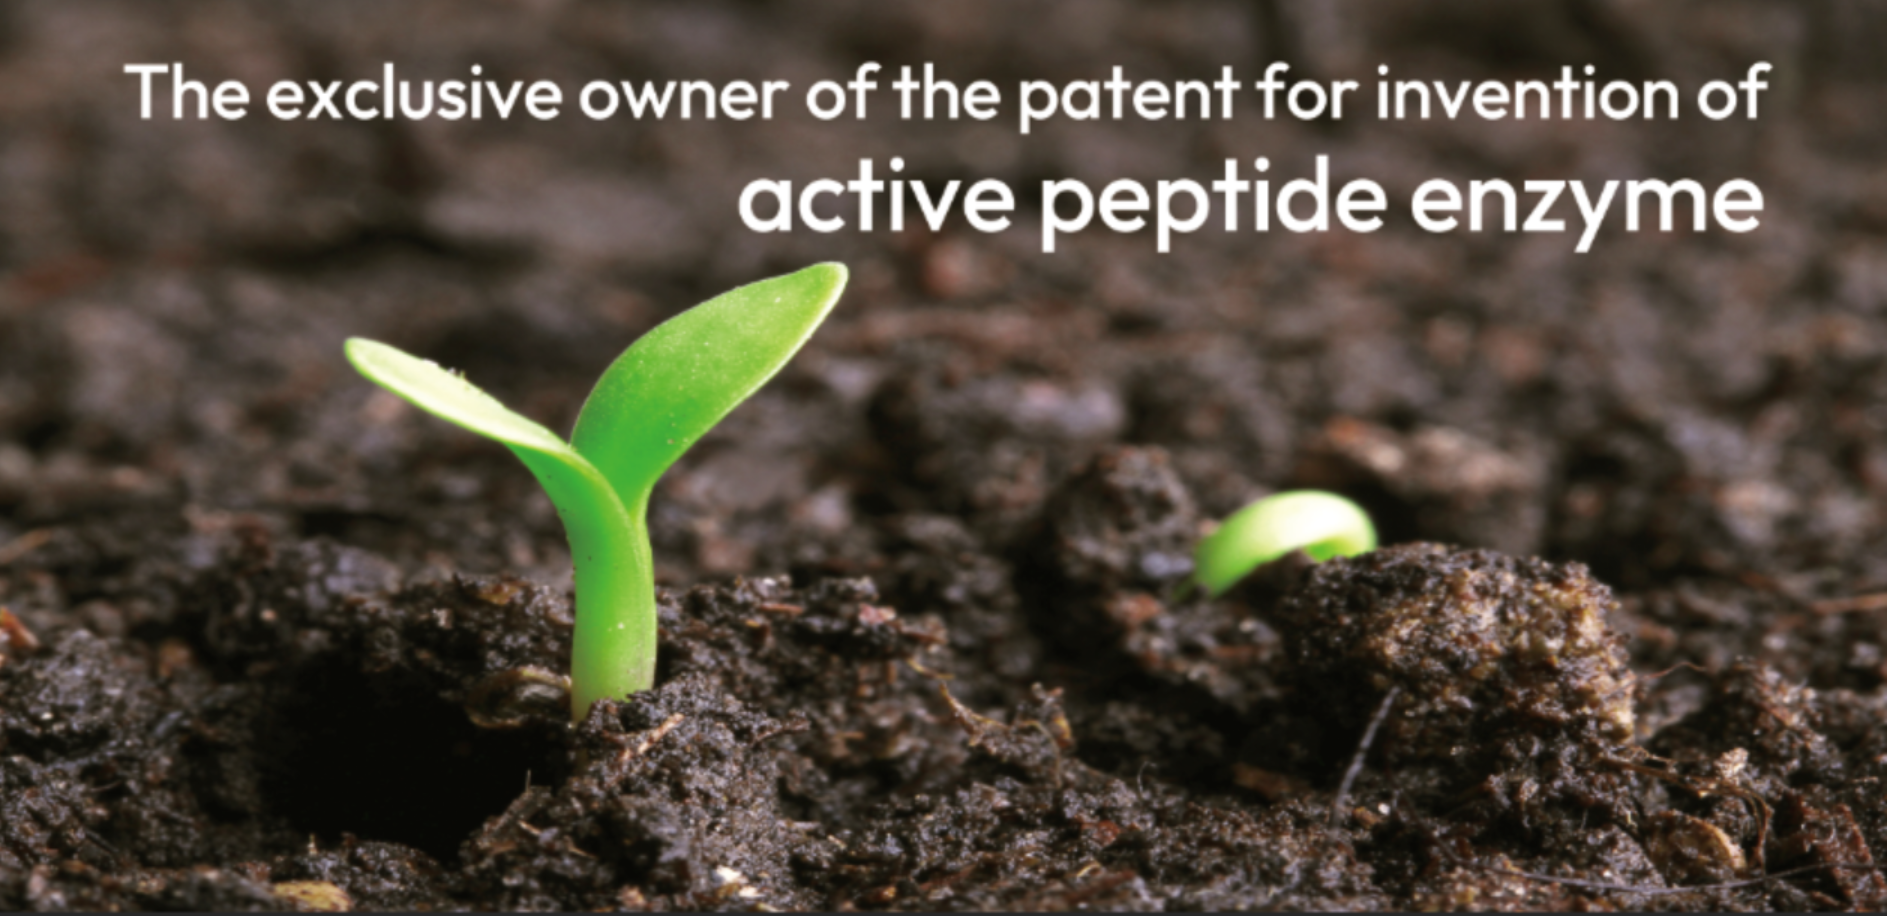 Desert Miracle: Active Peptidase Enzyme (APE+) - Enzymes in 'Intelligent Crop’ Growth Era